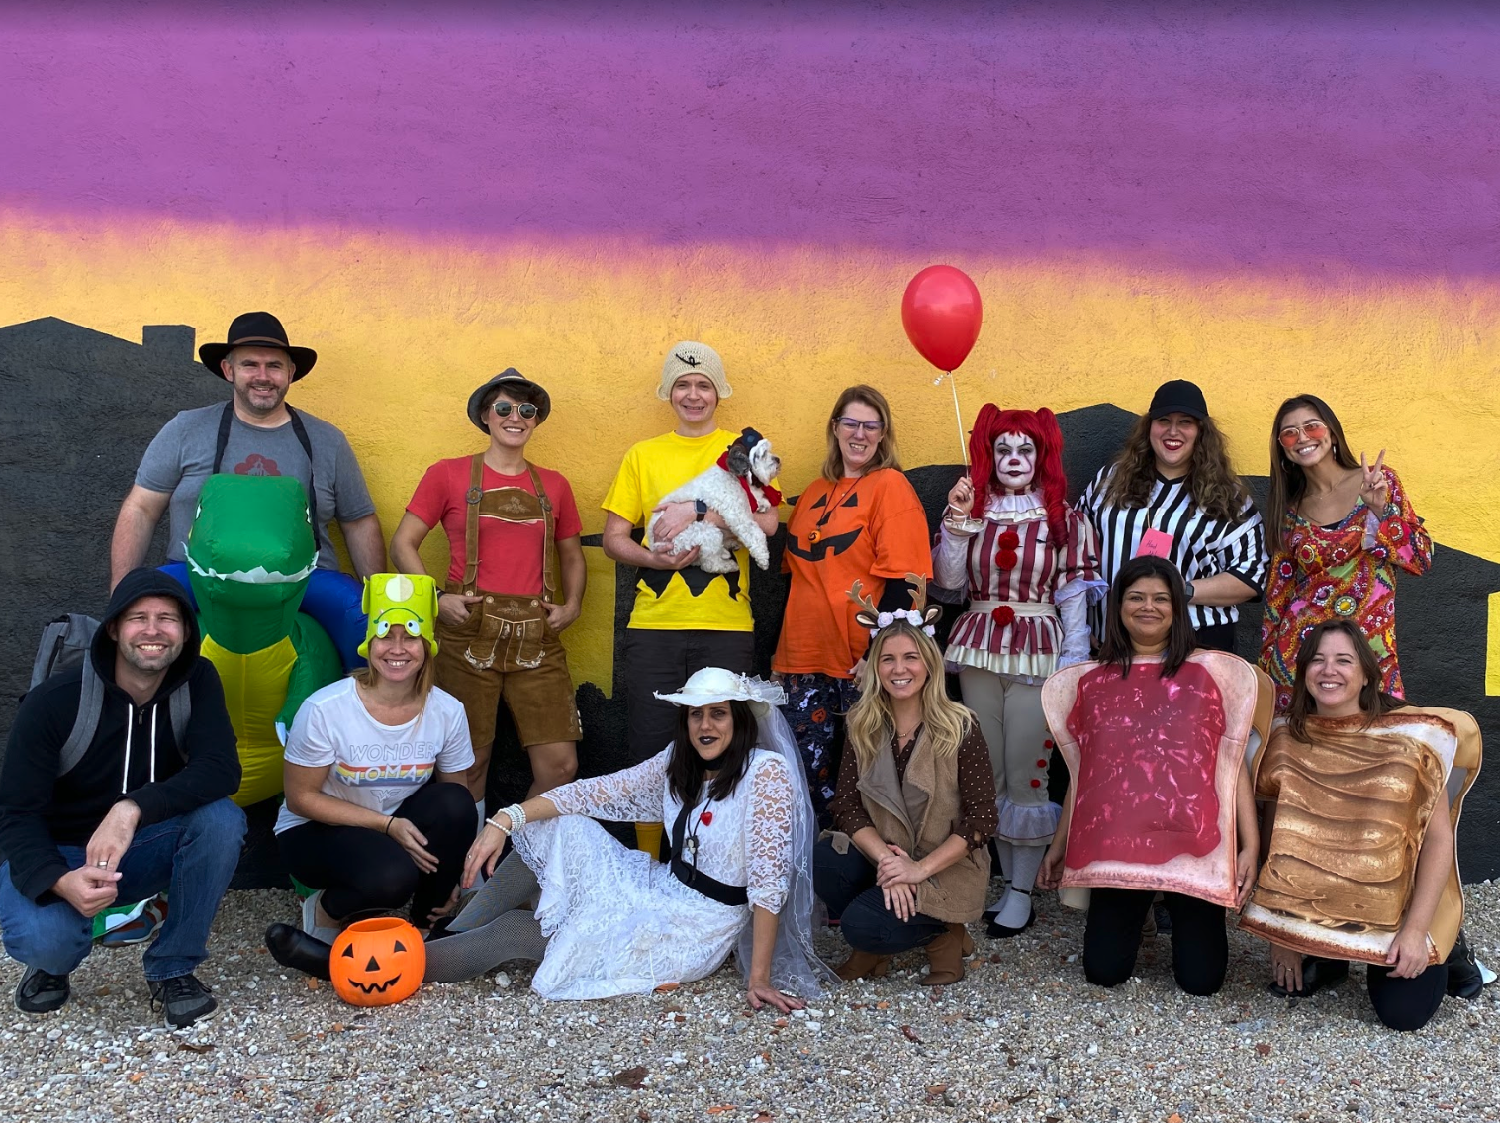 Happy Halloween from Amplified IT!